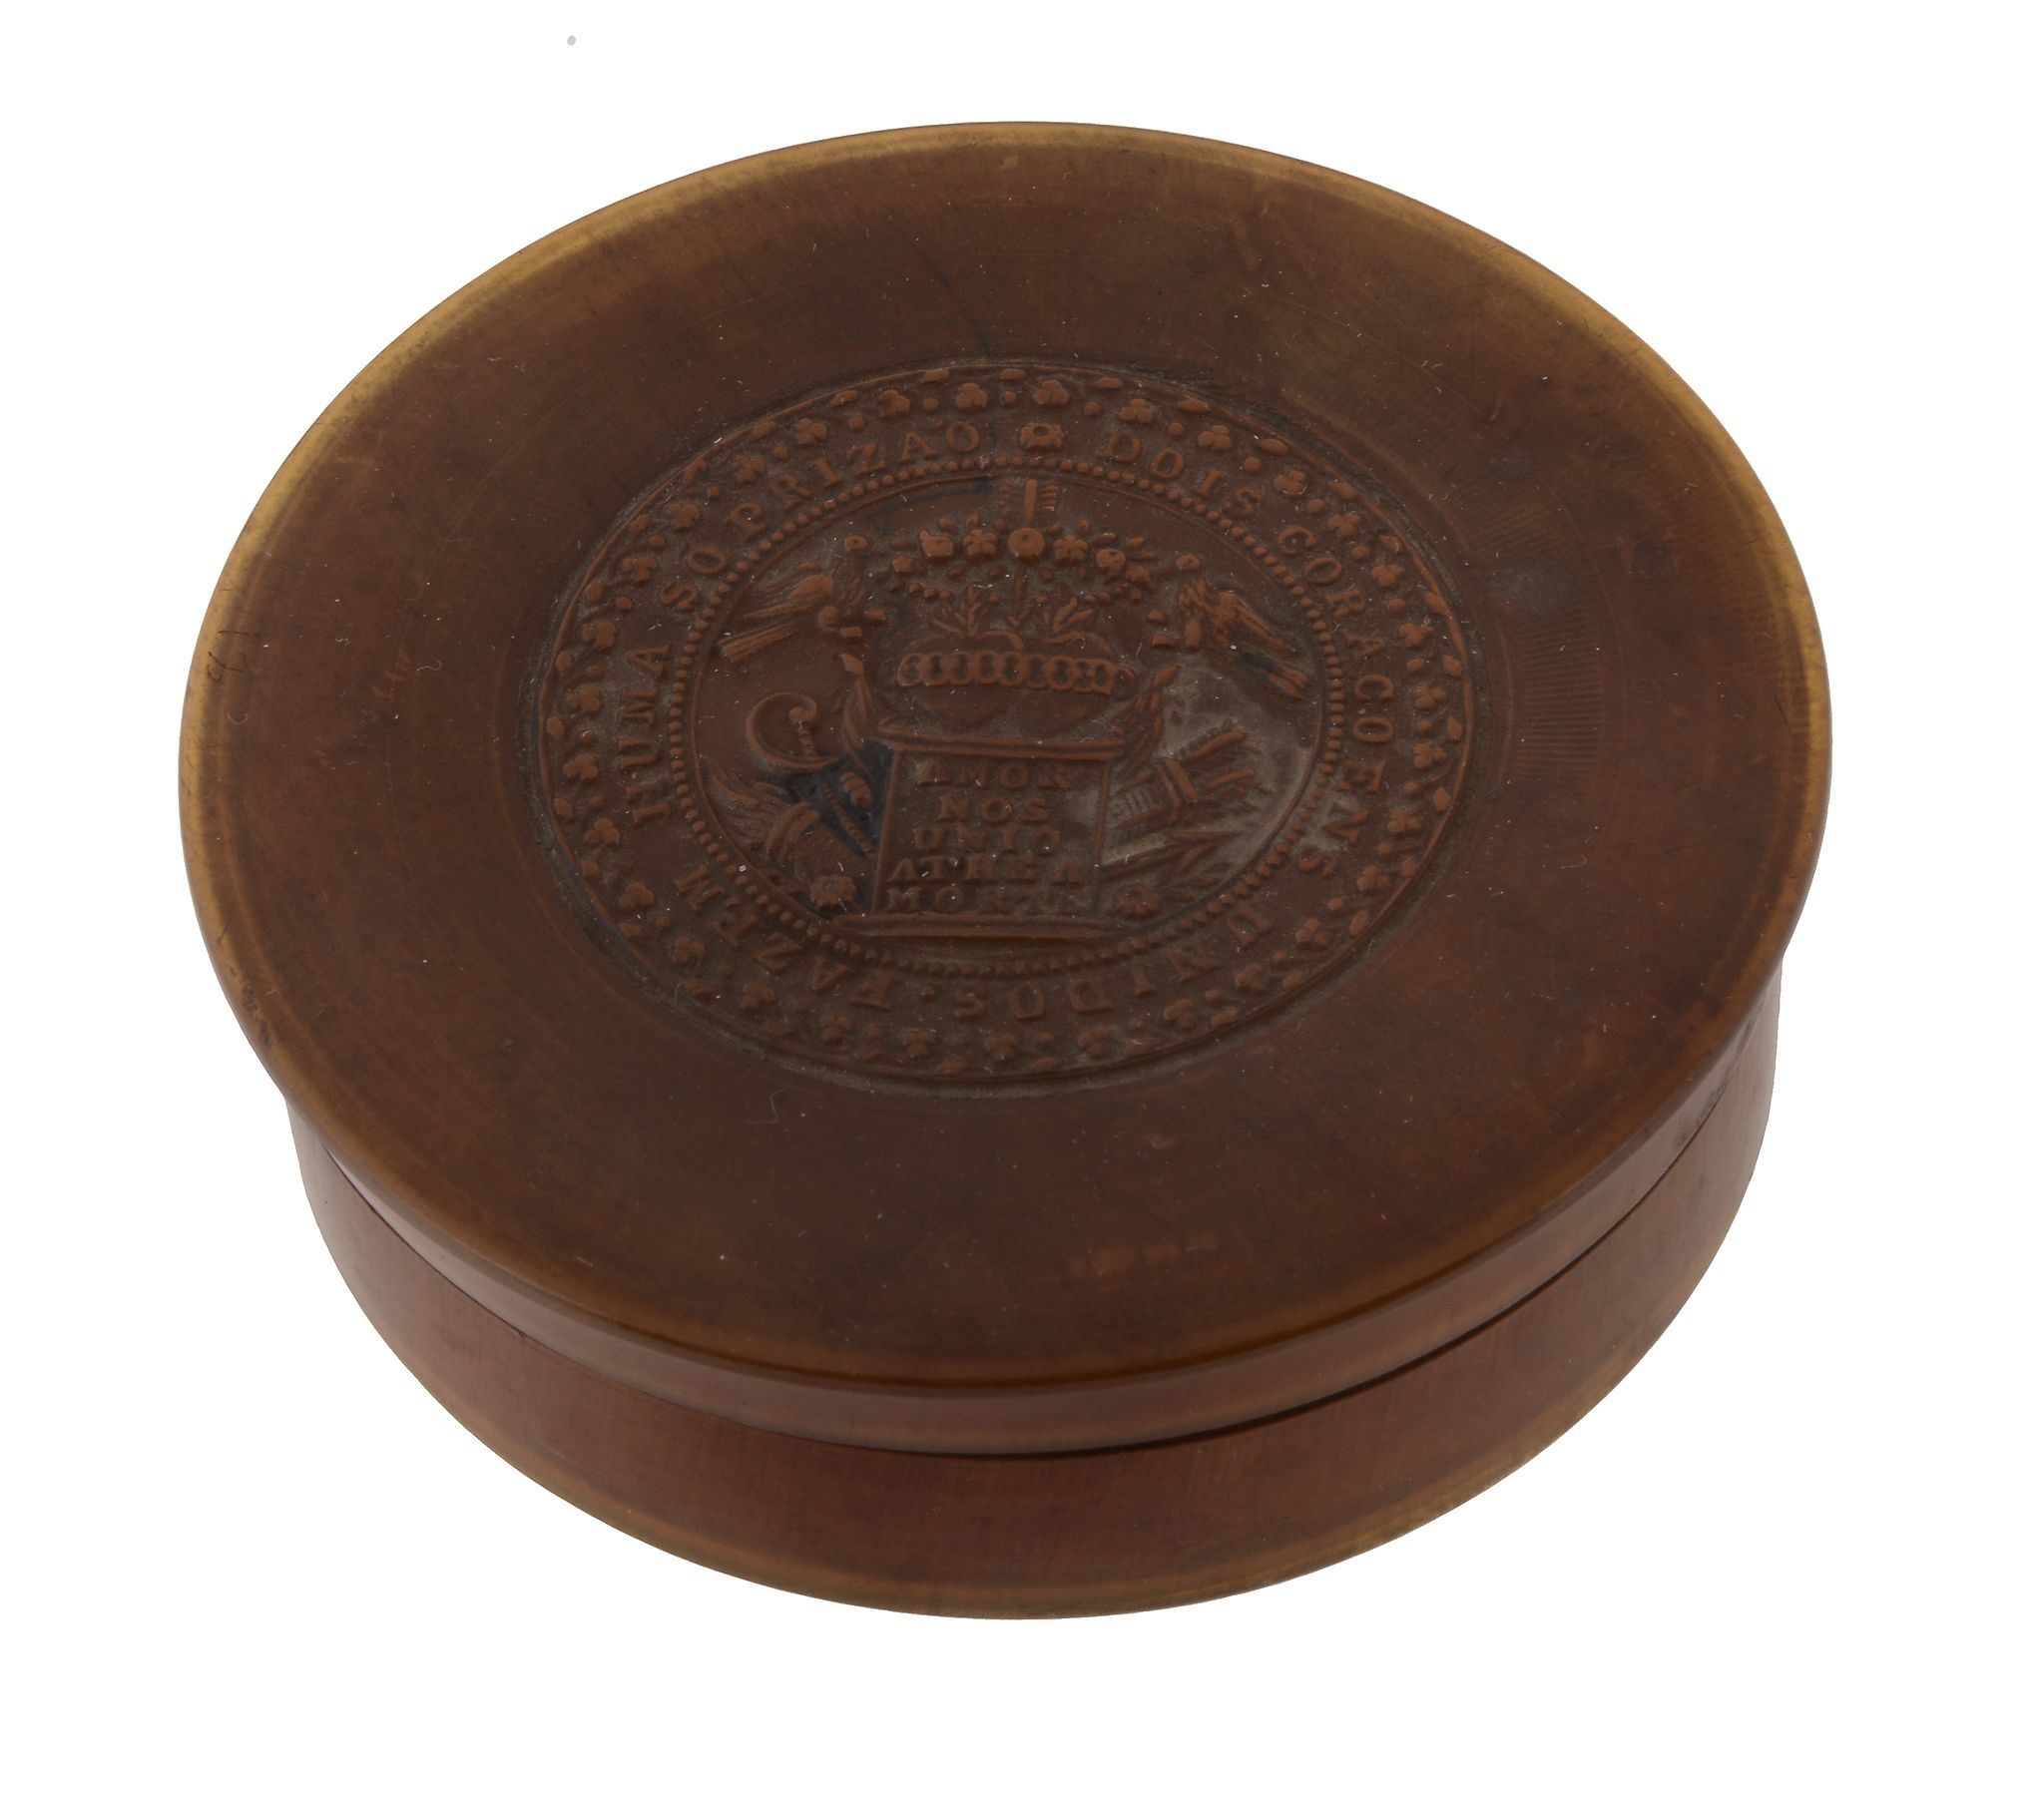 A Continental horn circular tobacco box or bonbonniere, early 19th century, the cover with pressed